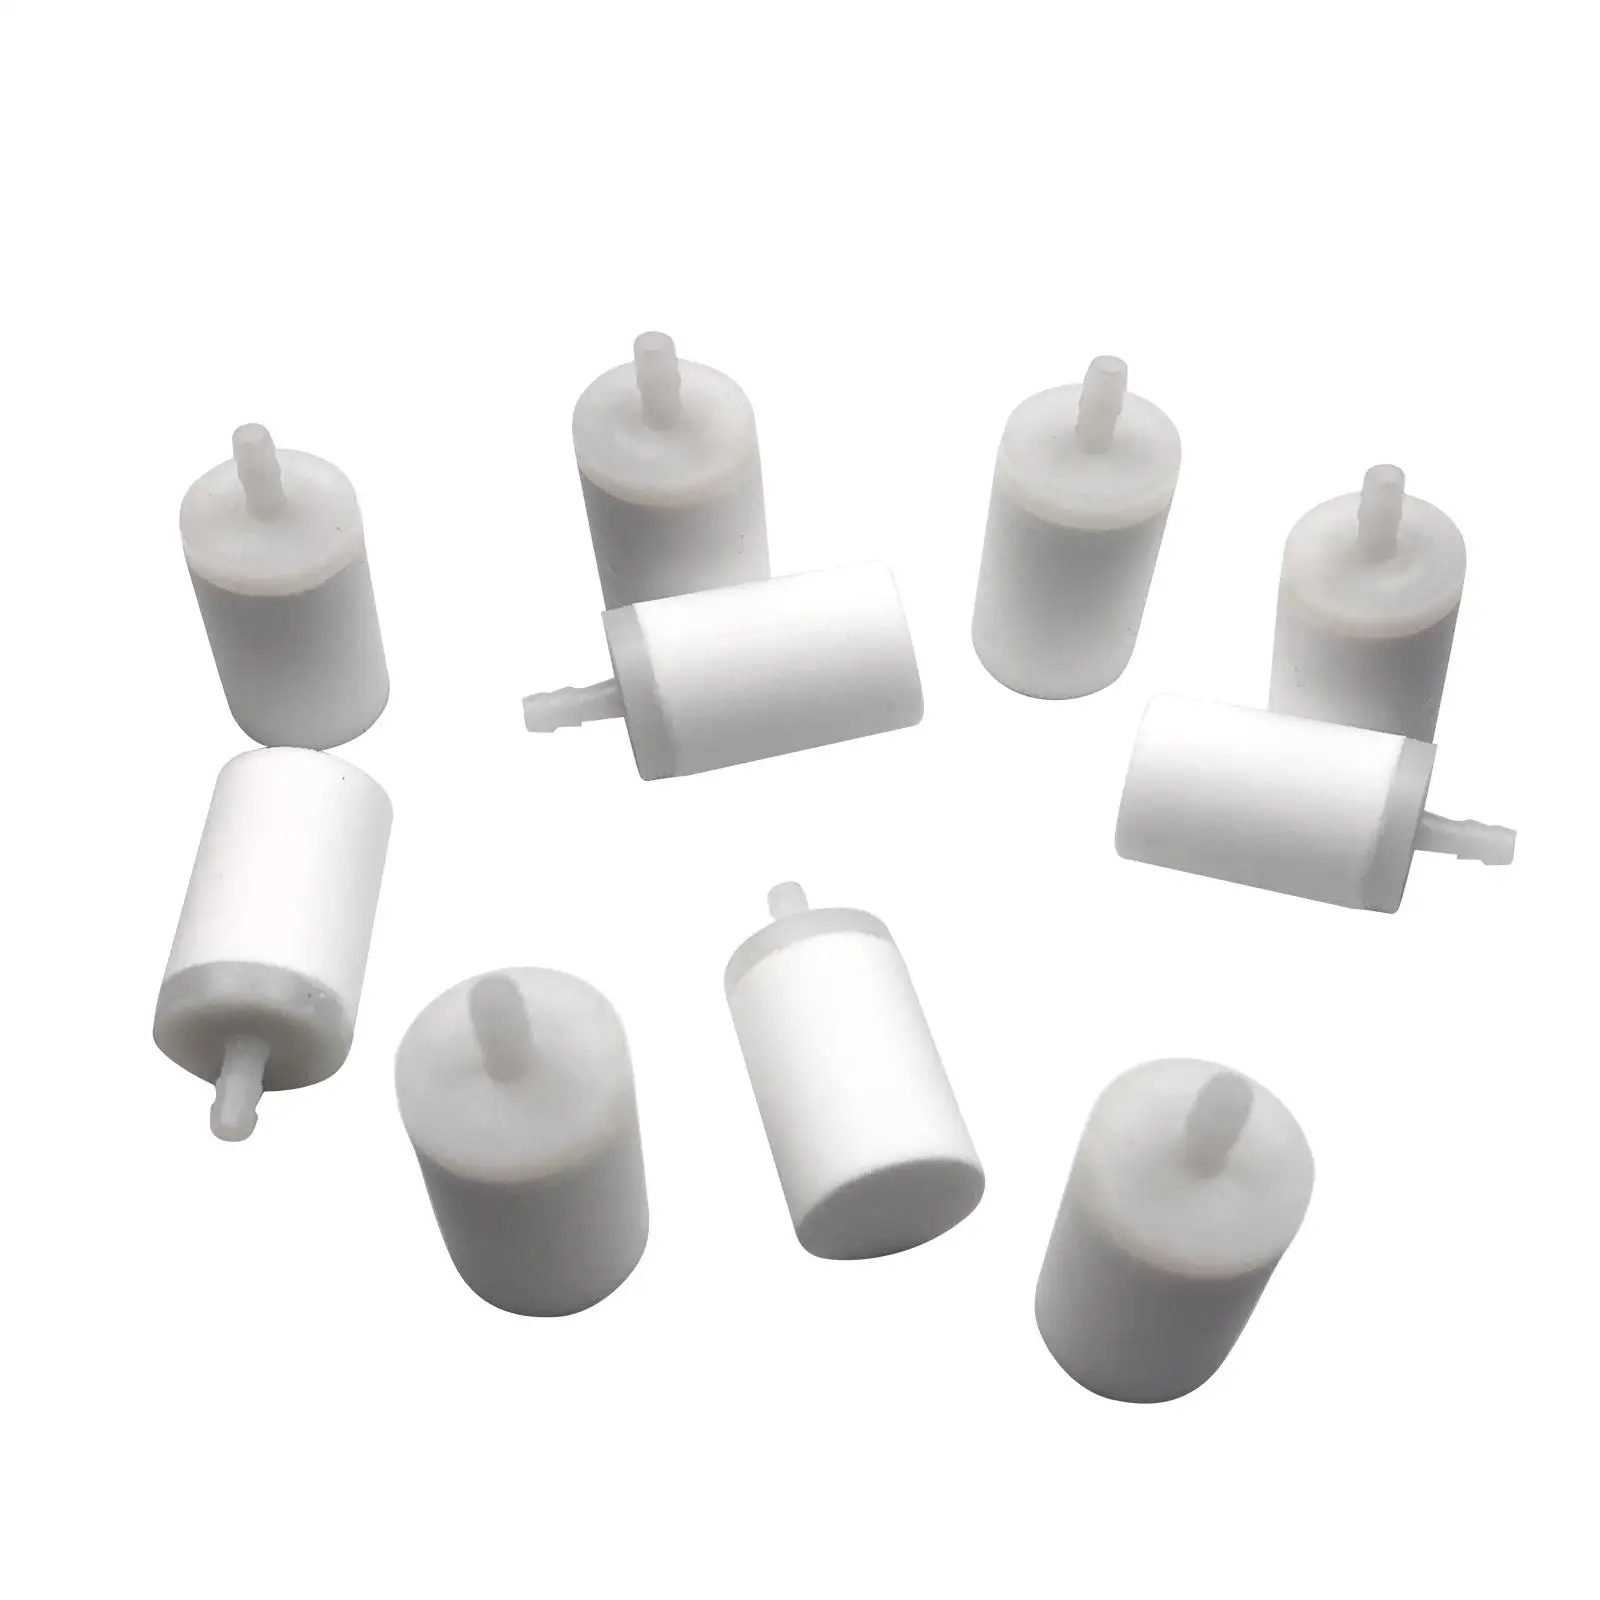 Fuel Filters Fit for   50 5 61 268 272 XP 345 350 351 353    Blower 5034432-01 New Pack of 10